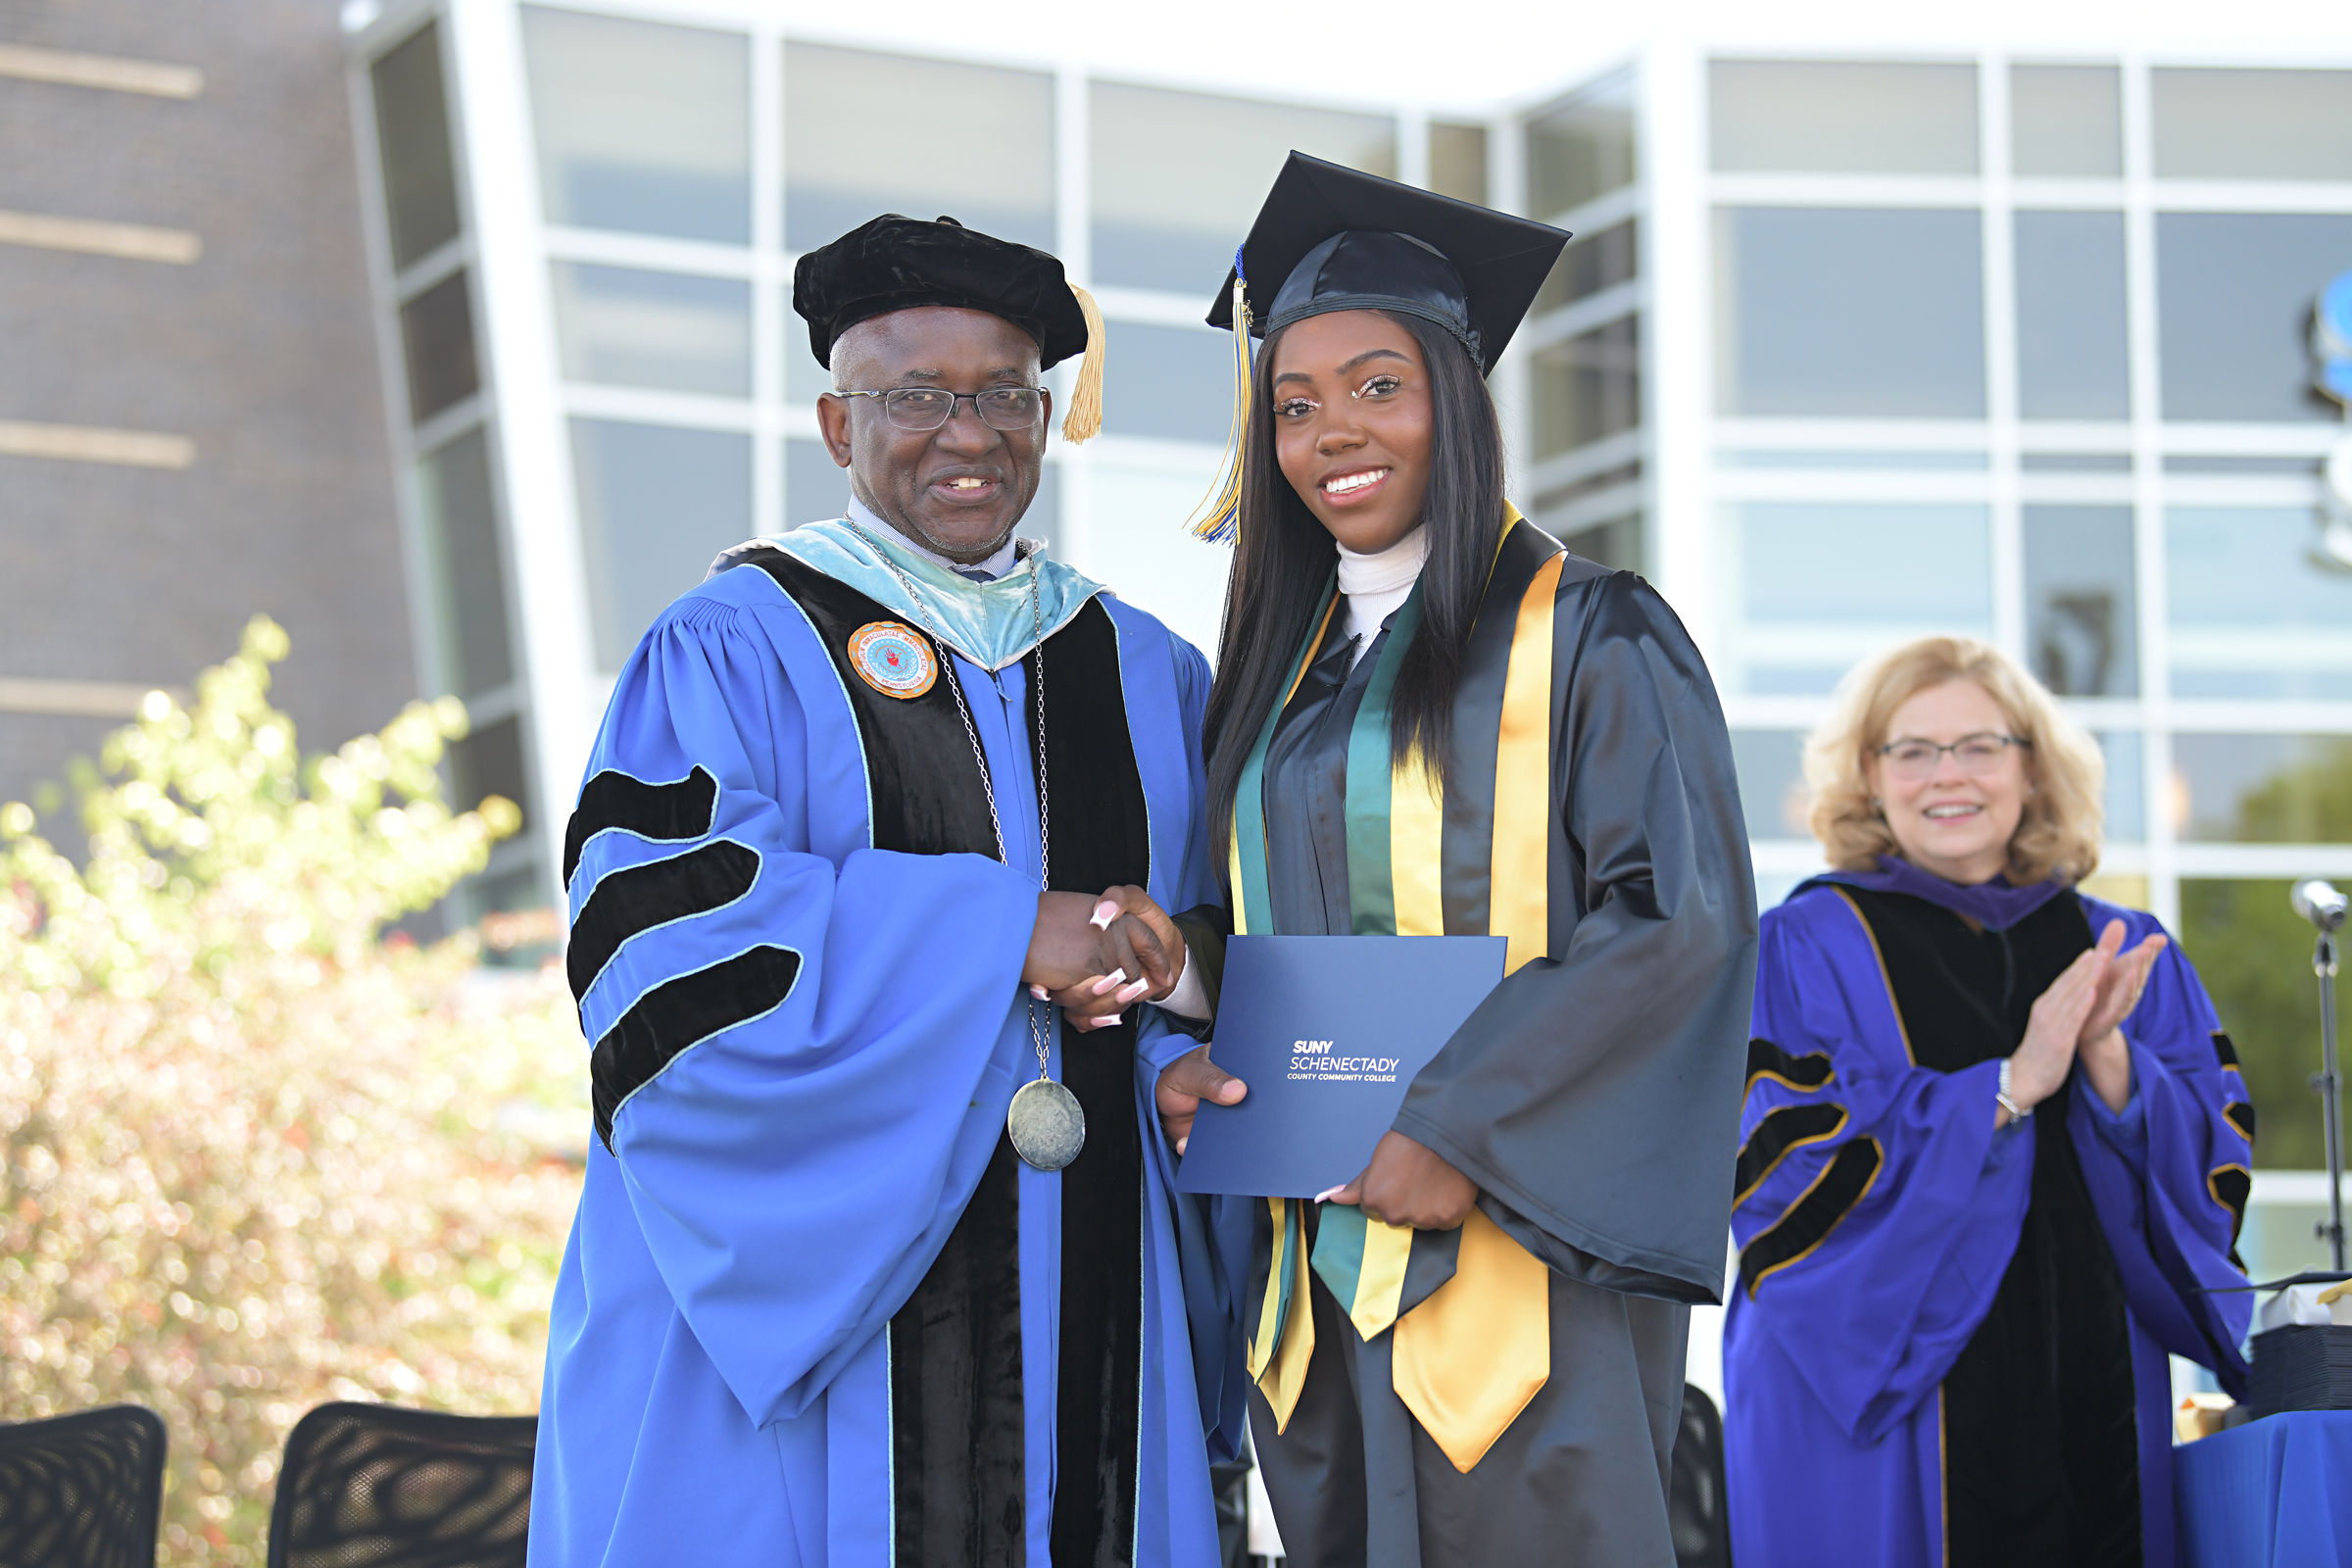 Justina Campbell in cap and gown shaking hands with College President Dr. Moono on stage outside during Commencement